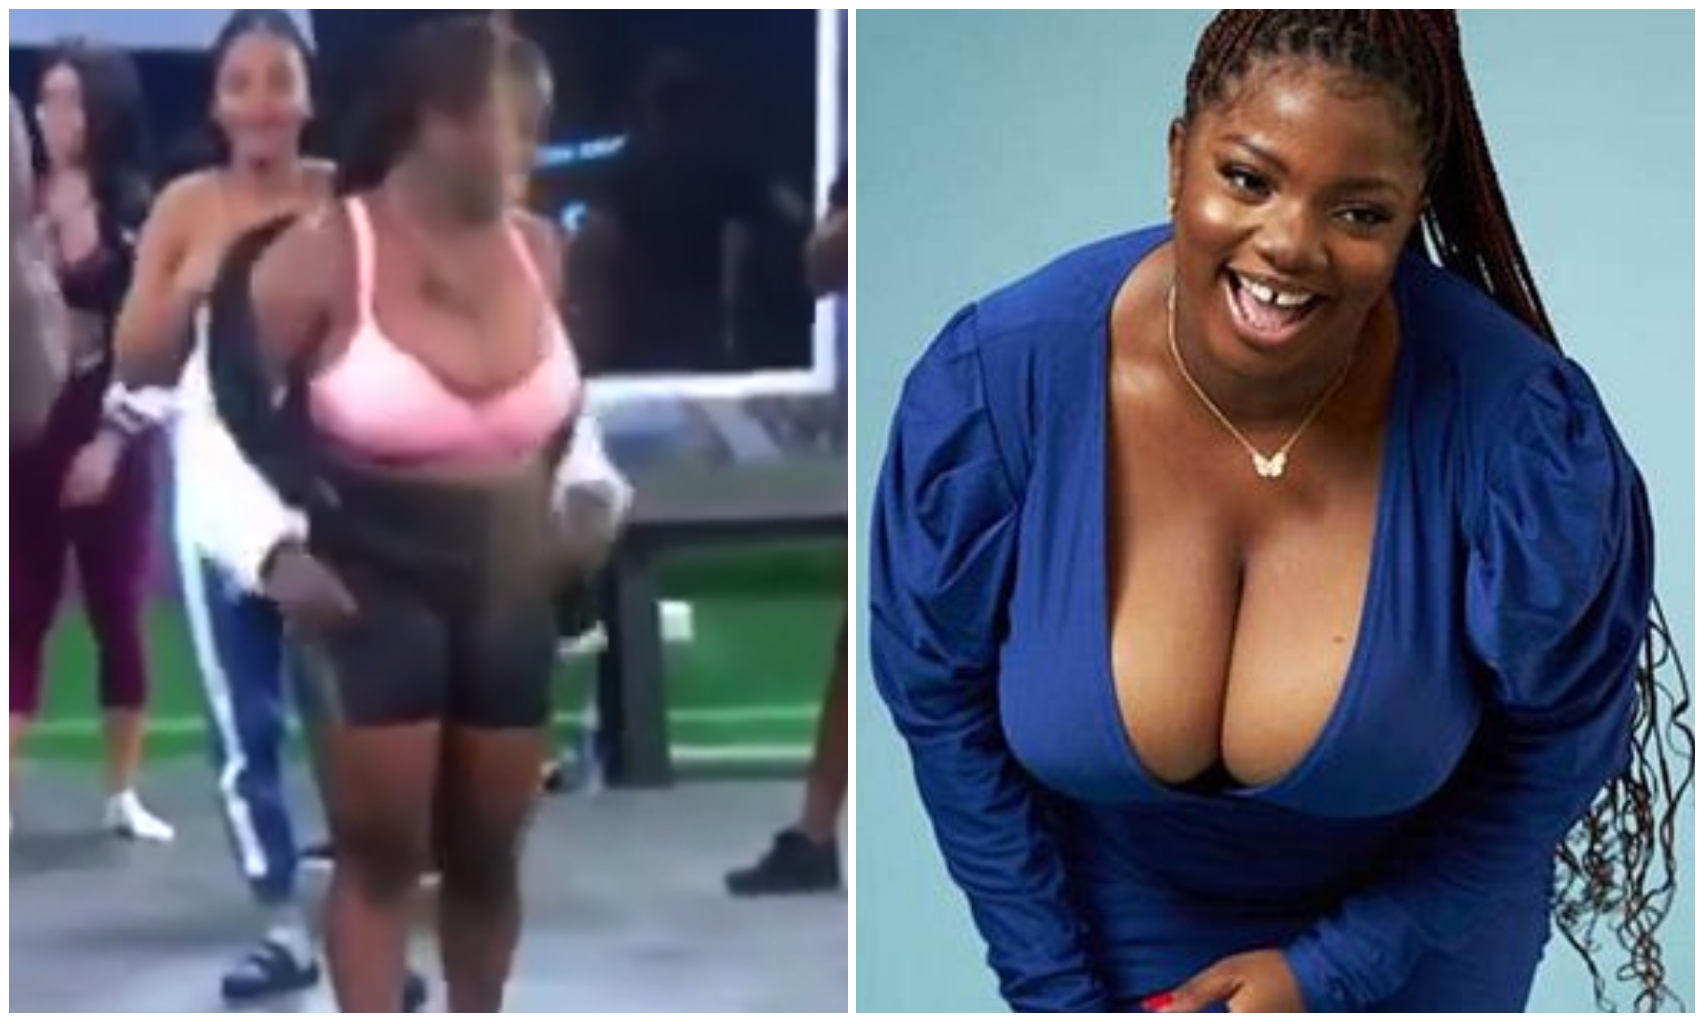 #BBNaija: Dorathy’s sitting style opened her floodgate as she exposes her panties (Photo)